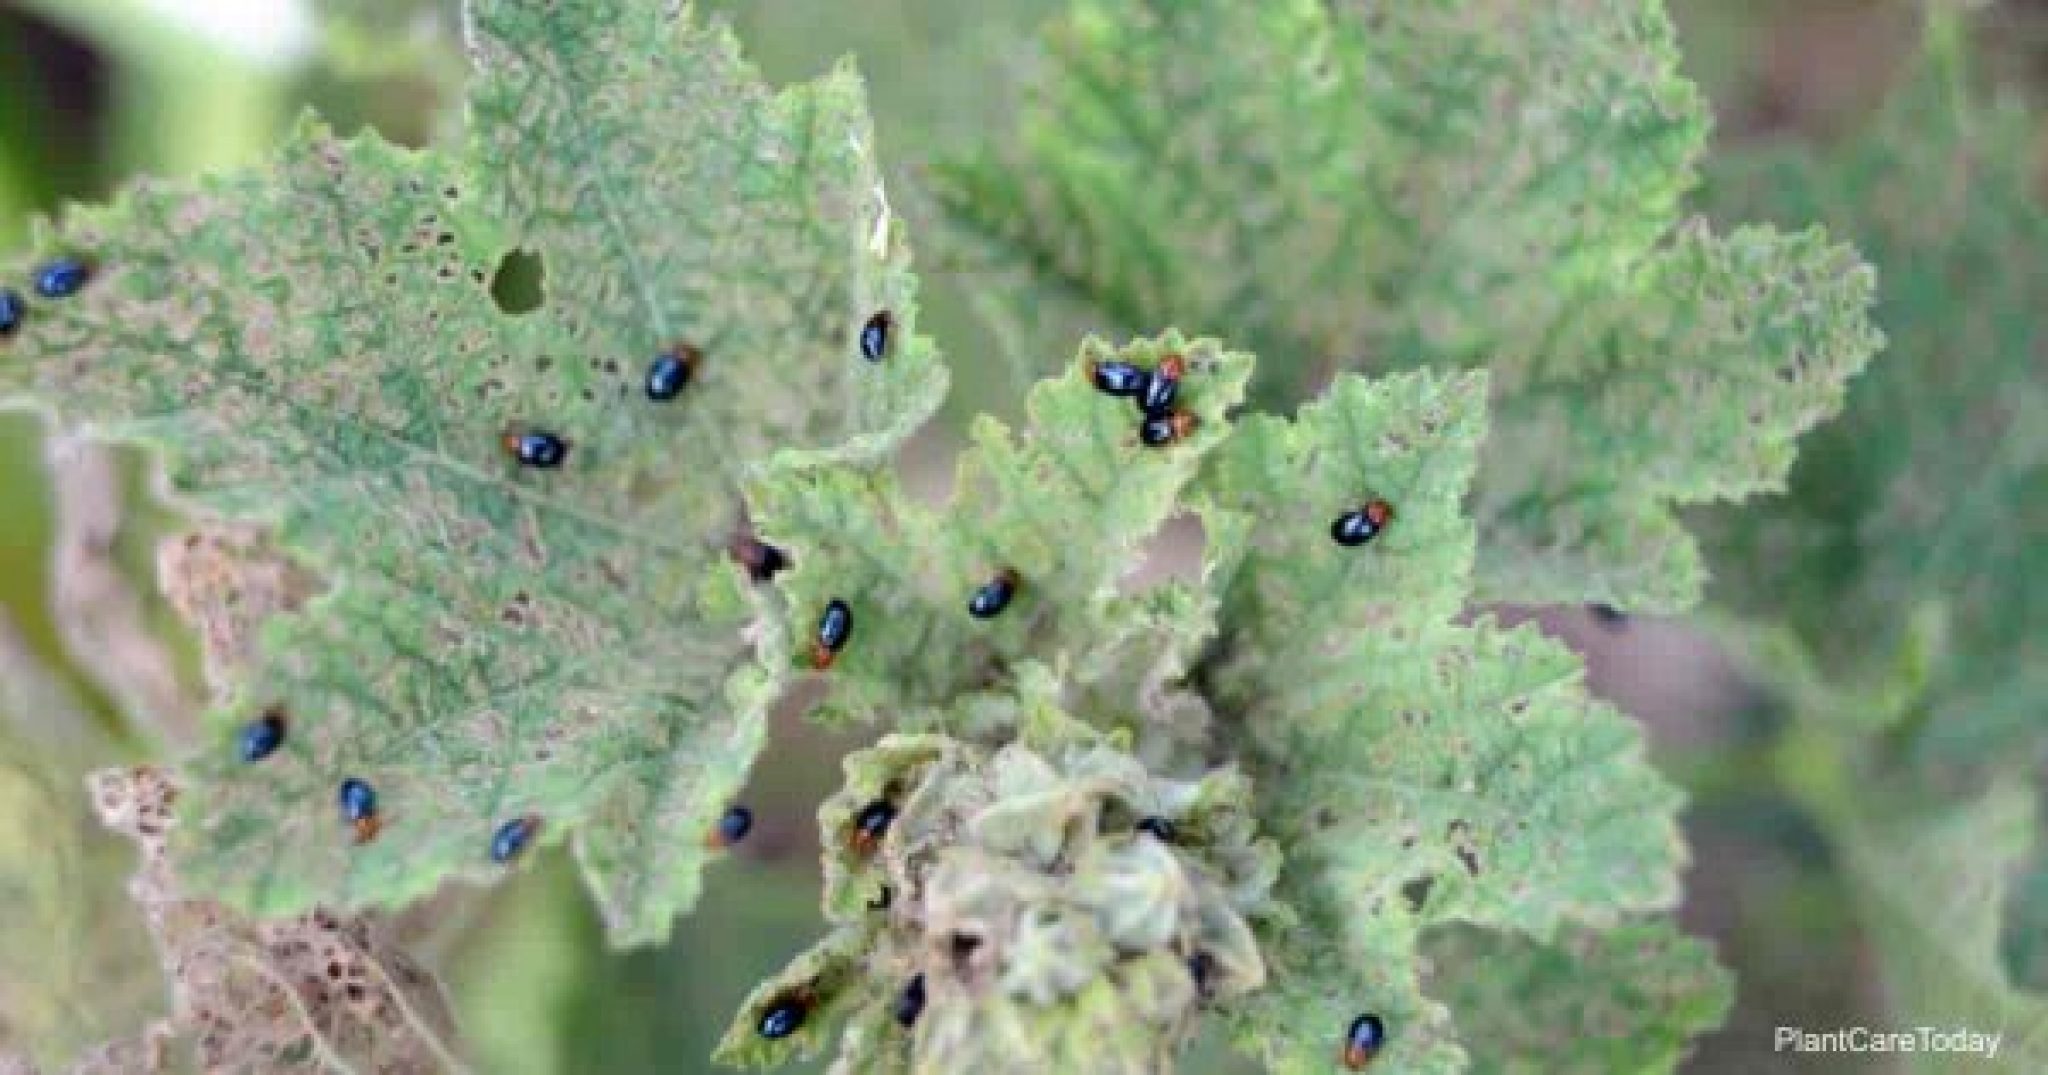 Tiny Black Bugs In Plant Soil Everything You Need to Know